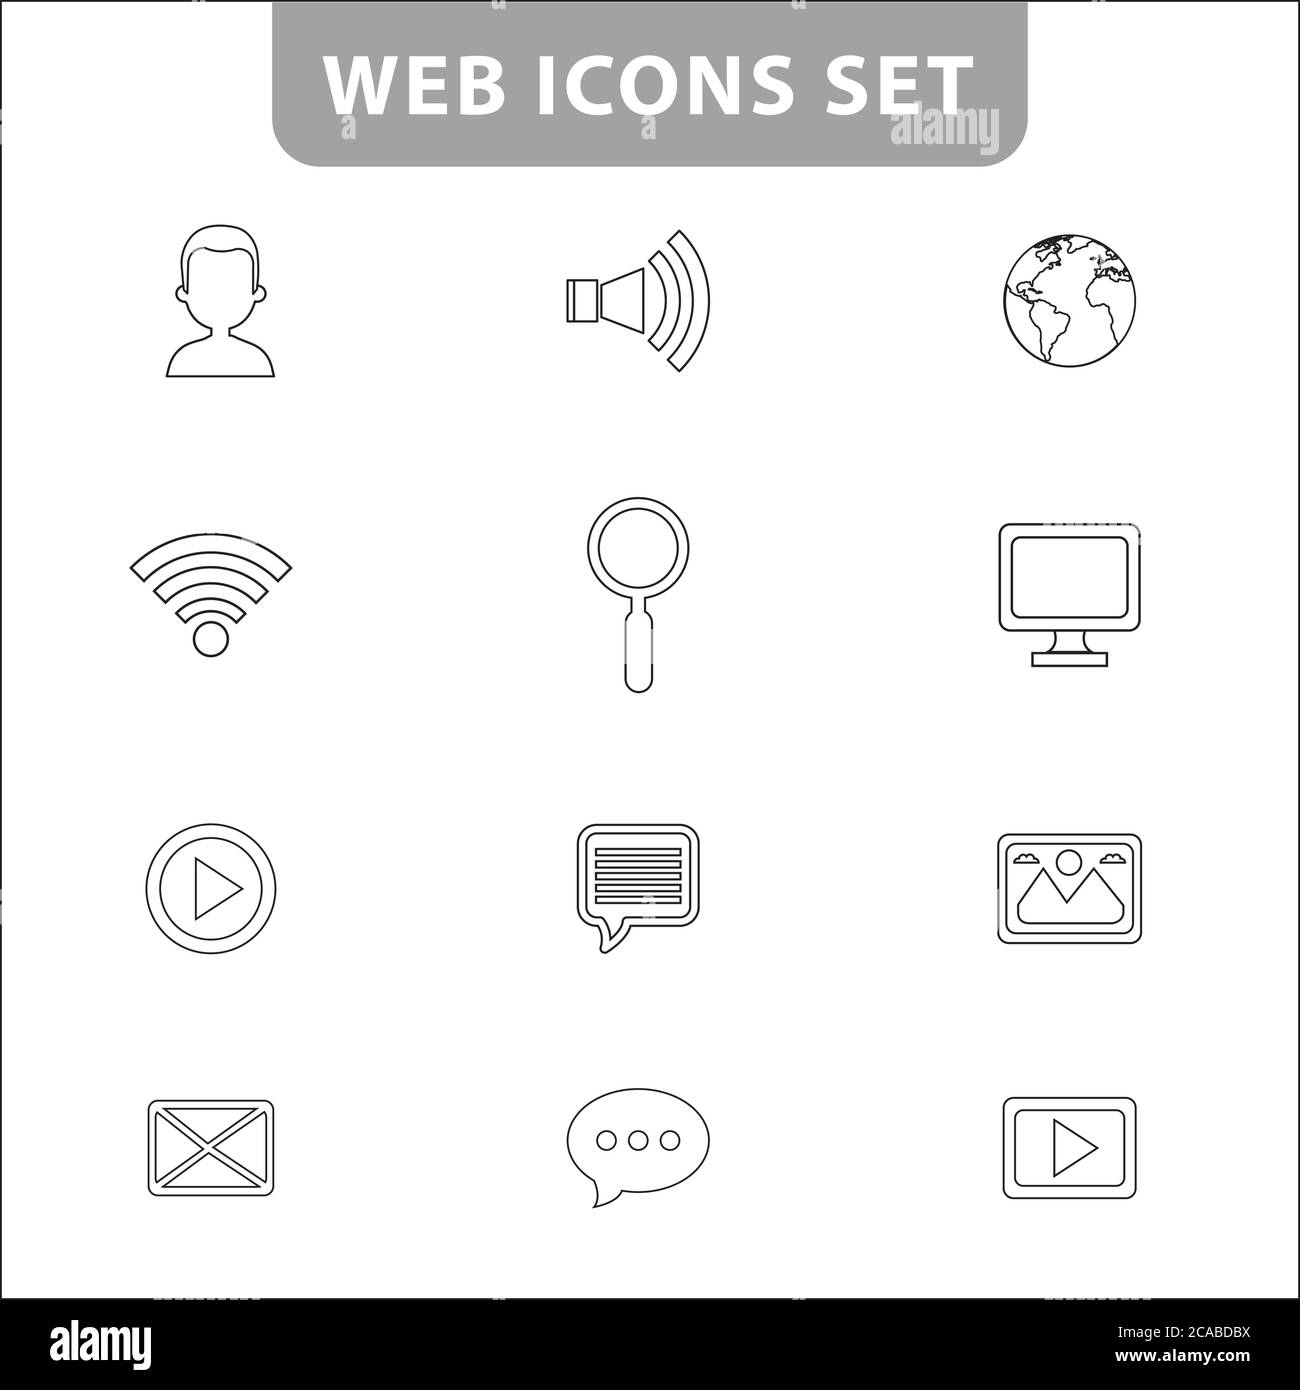 Web and Contact icon  set. Outline vector icons for web and mobile, wifi icon, man icon, world, search, monitor, mail, play button, conversation icon, Stock Vector